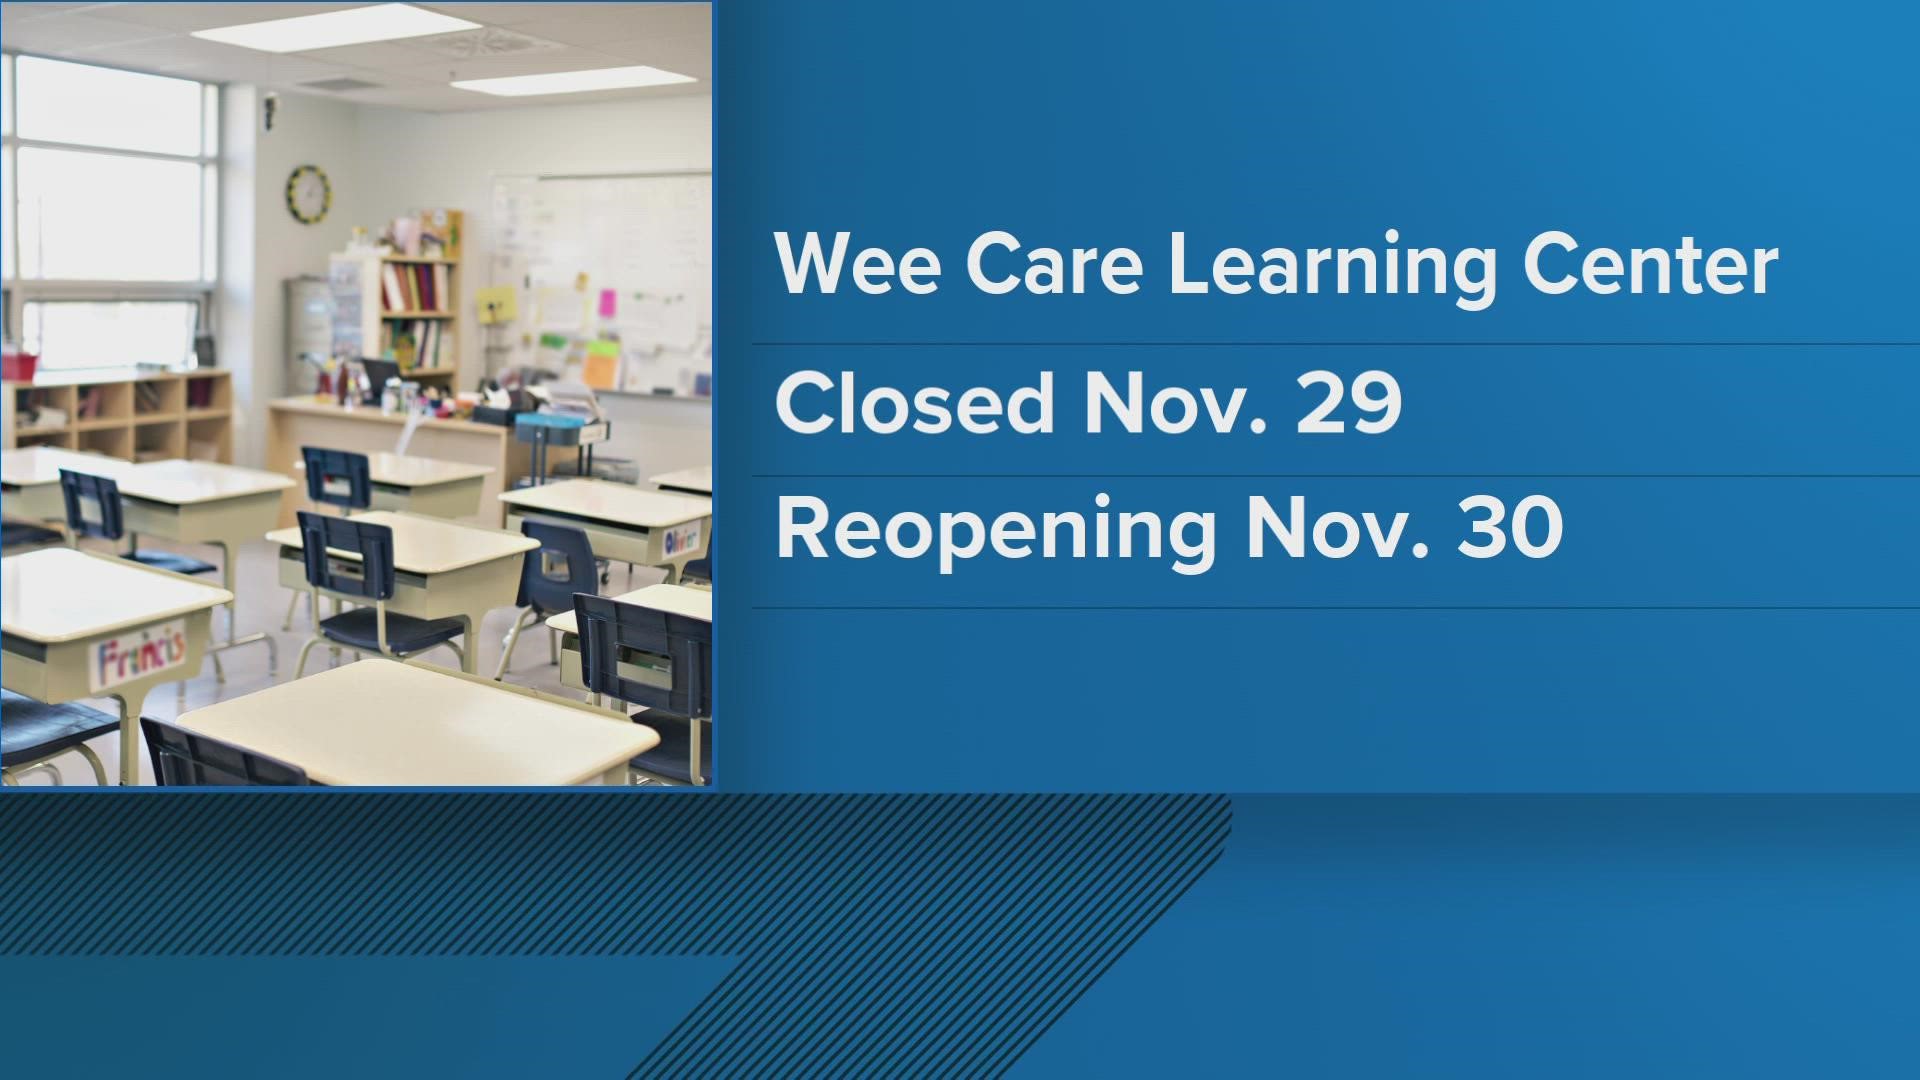 The Wee Care Learning Center in Morristown will be closed Tuesday because of illness.